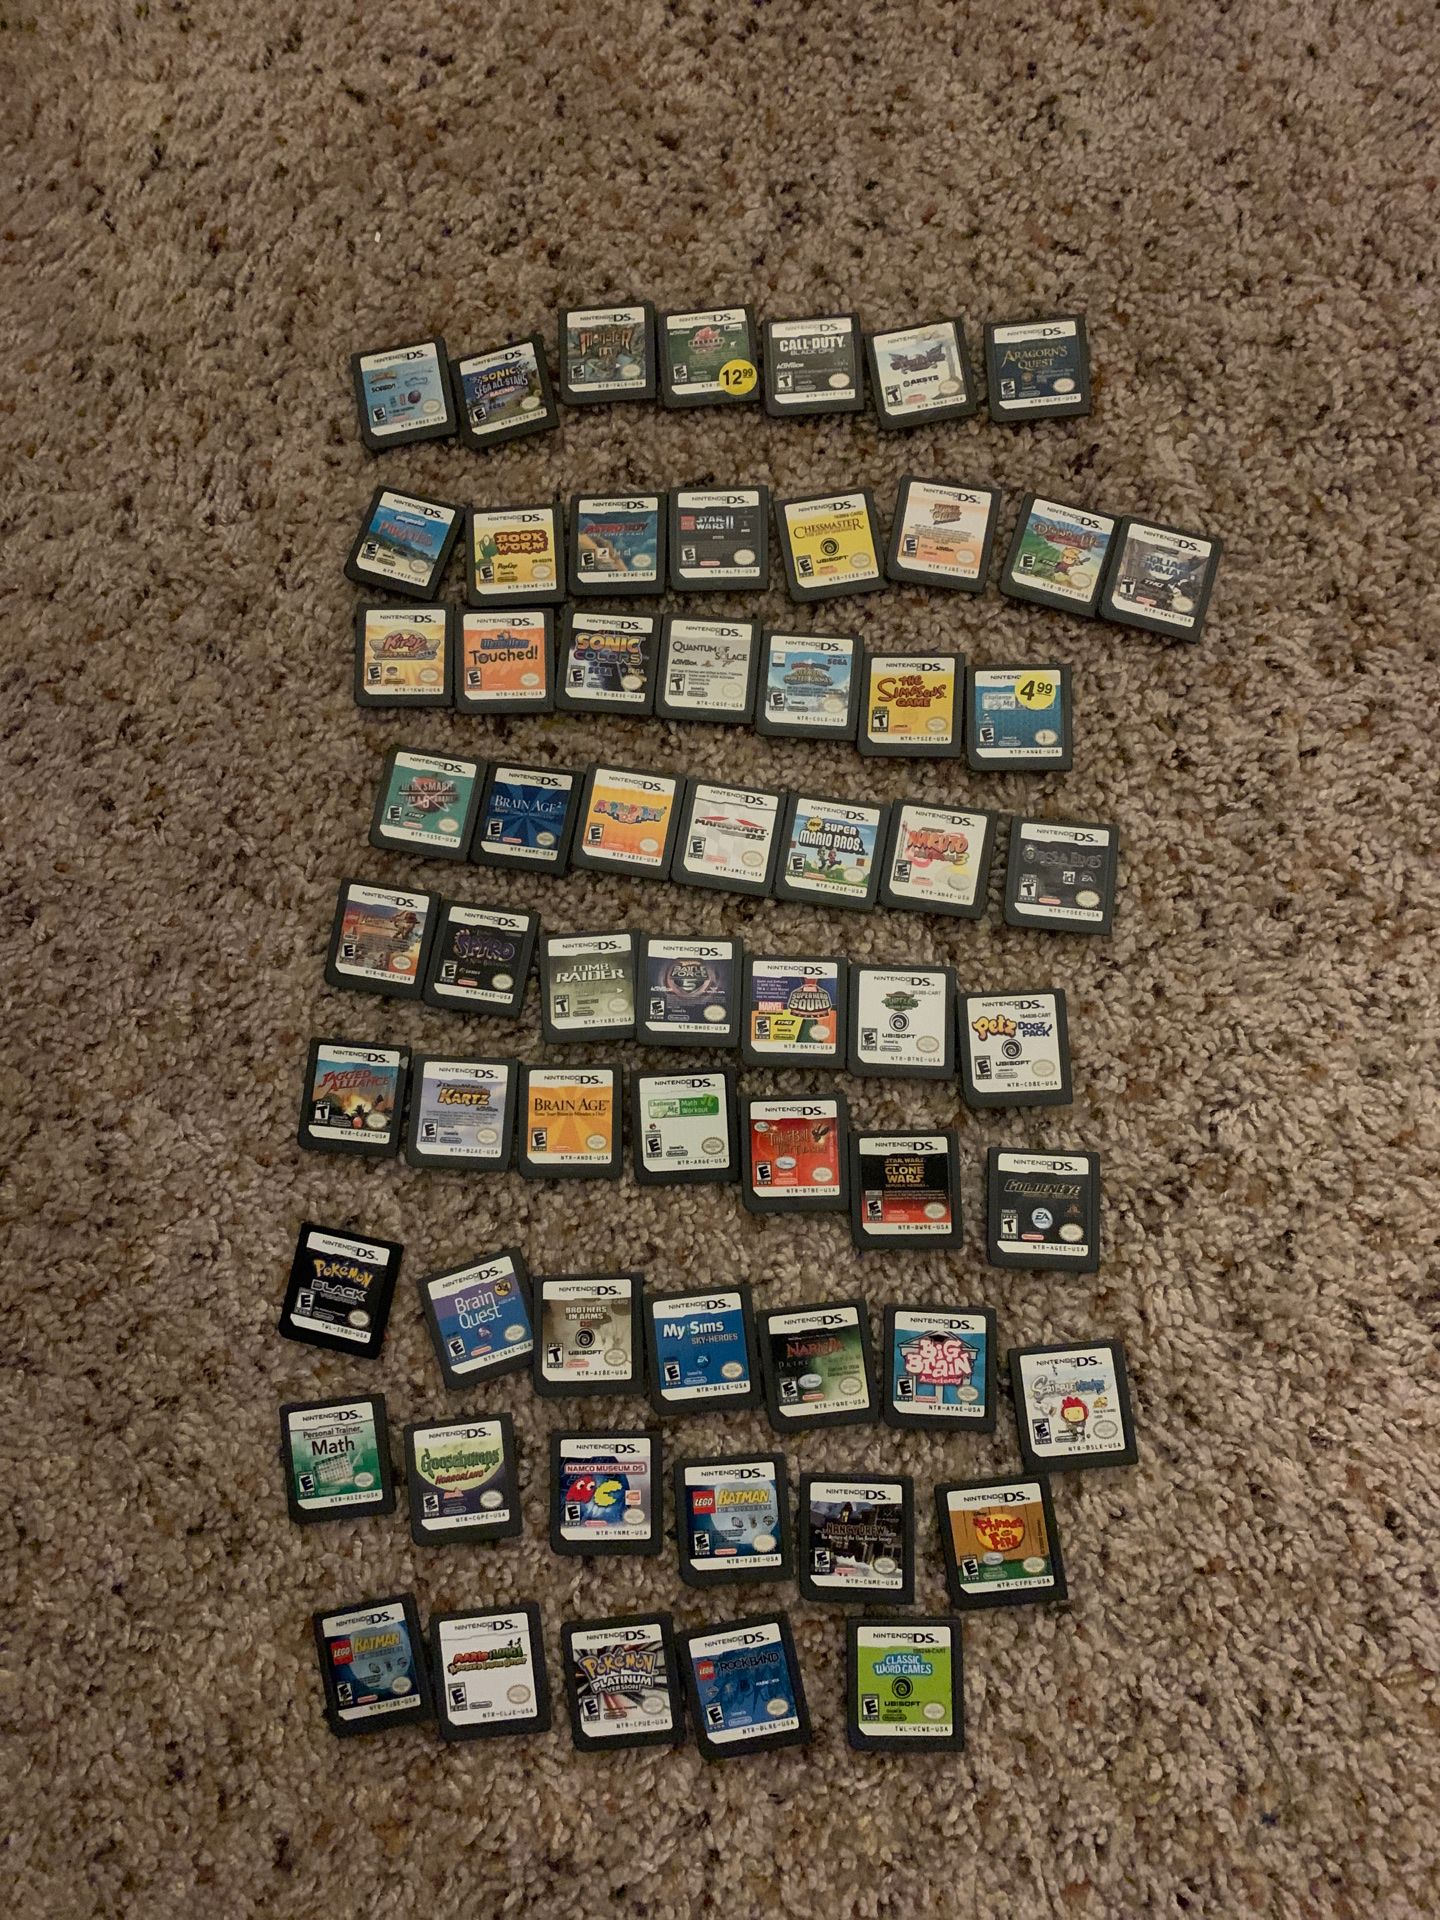 61 ds games and two ds cases + cartridge holder